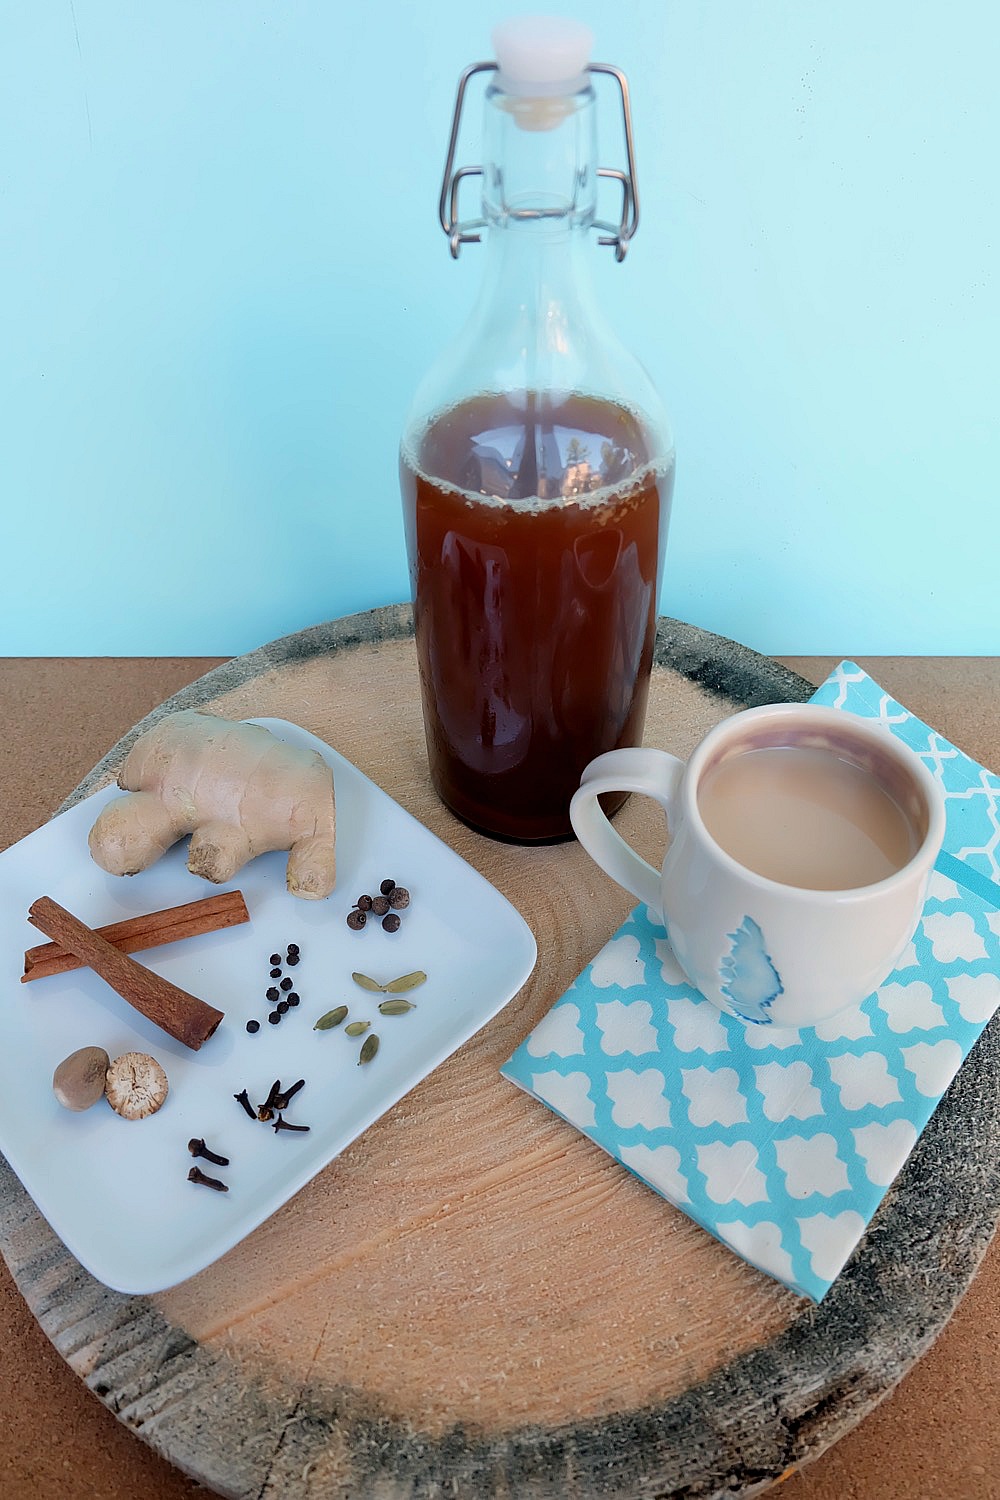 Move over Starbucks! This spicy chai tea concentrate recipe is simple to make and can be stored in the fridge for an easy cup of chai tea in minutes! Filled with ginger and cinnamon it packs quite a spicy kick. It's also perfect for camping! Serve as a chai tea latte or an iced chai. Add this to your weekend meal prep list!